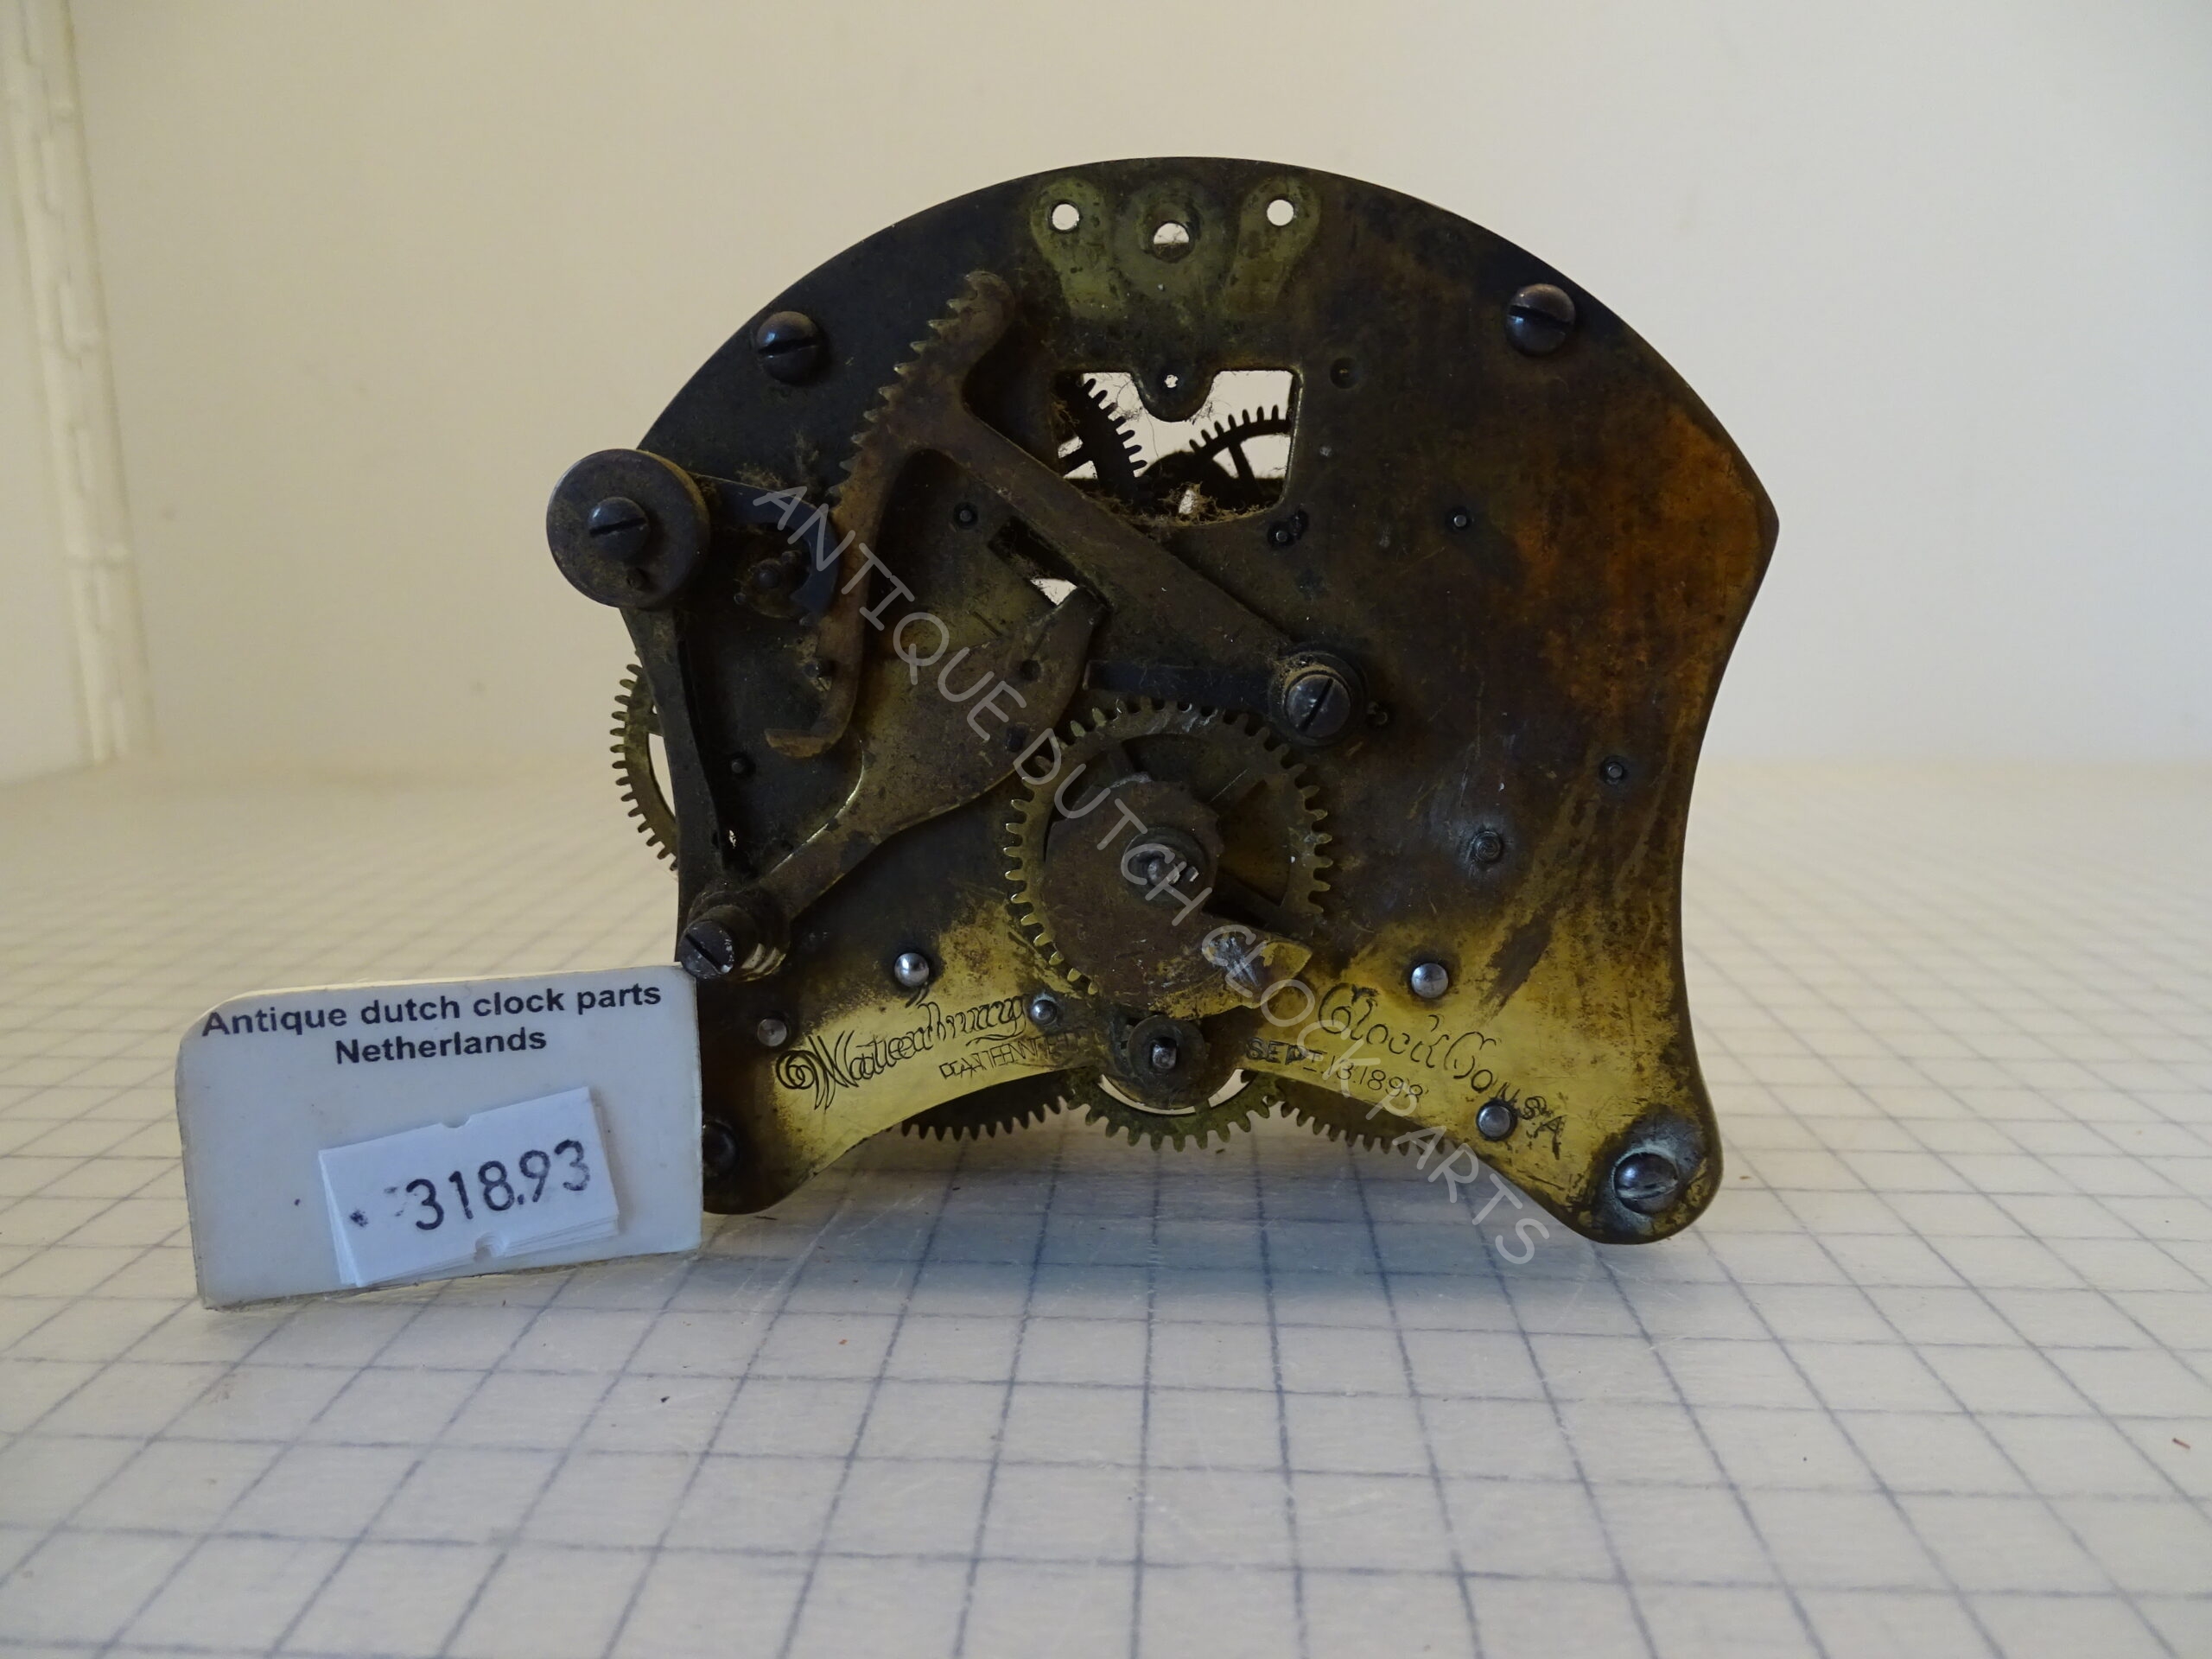 PARTS WATERBURY CLOCKWORK WITH A FRENCH BROCOT ESCAPEMENT